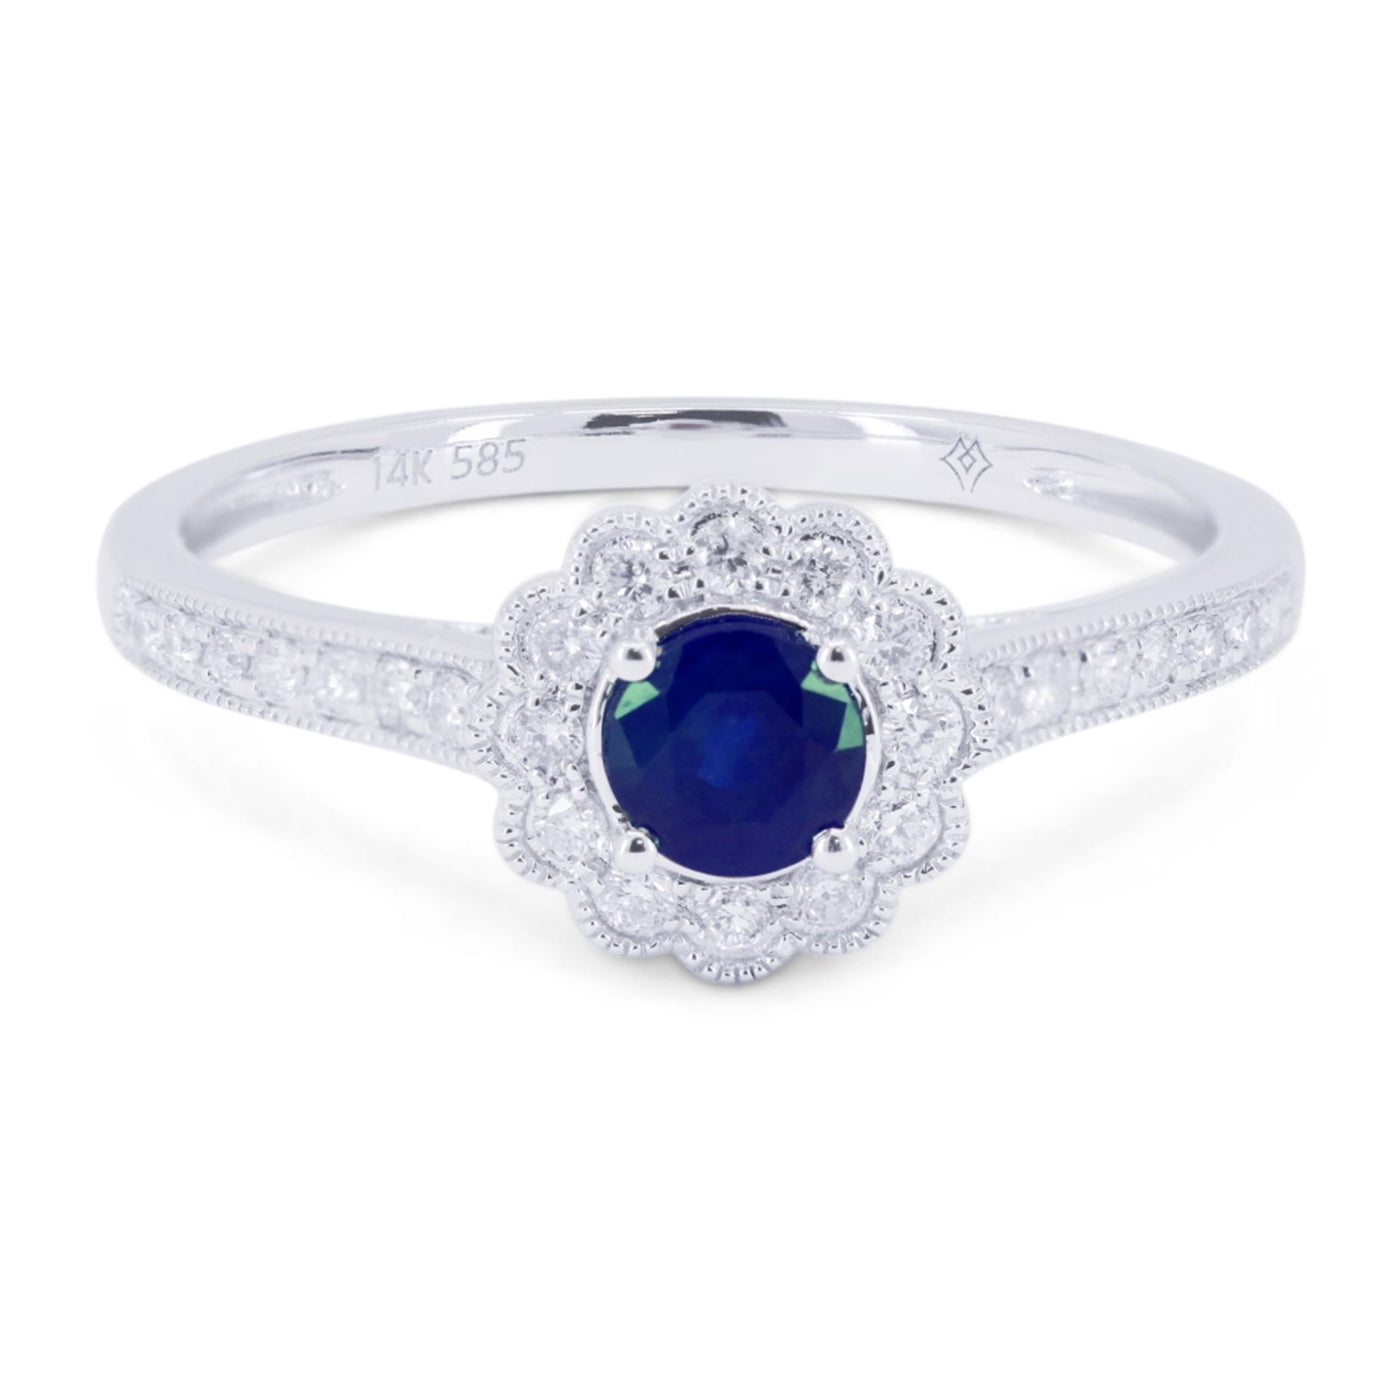 14K White Gold .52ctw Halo Style Sapphire and Diamond Ring